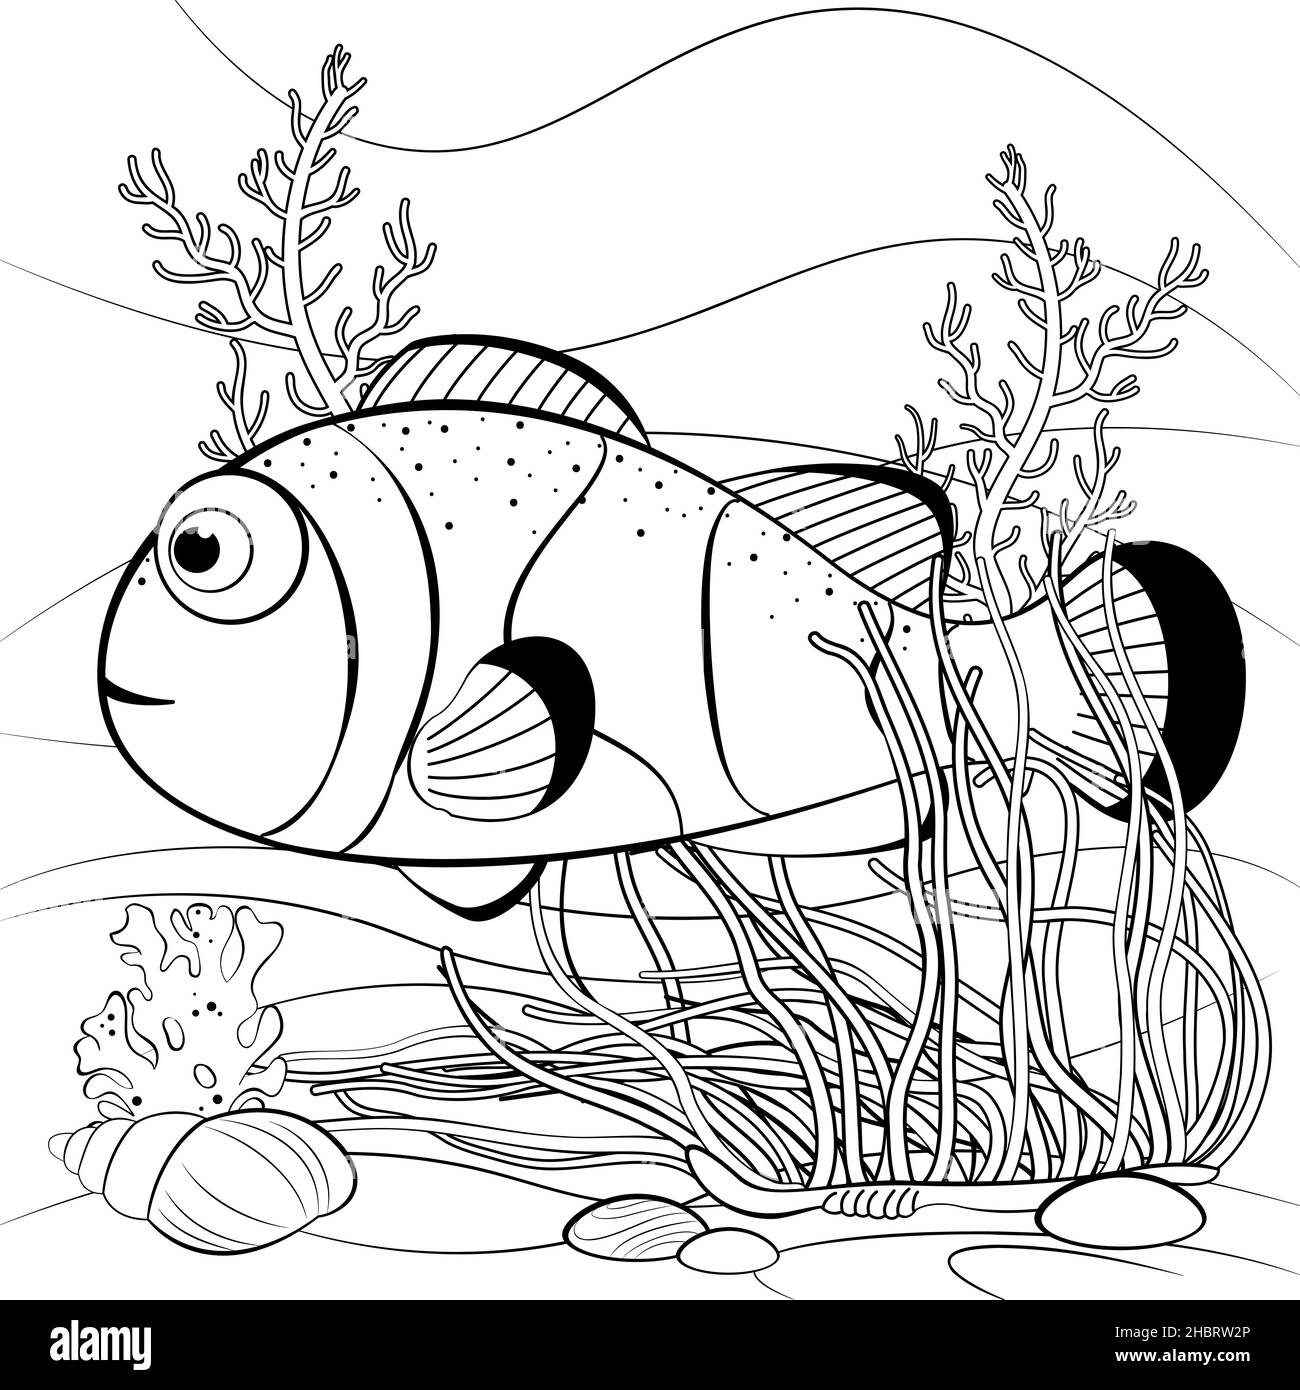 Easy Drawing Guides  Underwater Scene Drawing Lesson Free Online Drawing  Tutorial for Kids Get the Free Printable Step by Step Drawing Instructions  on httpbitly3a6s5y8  Underwater Scene LearnToDraw ArtProject   Facebook